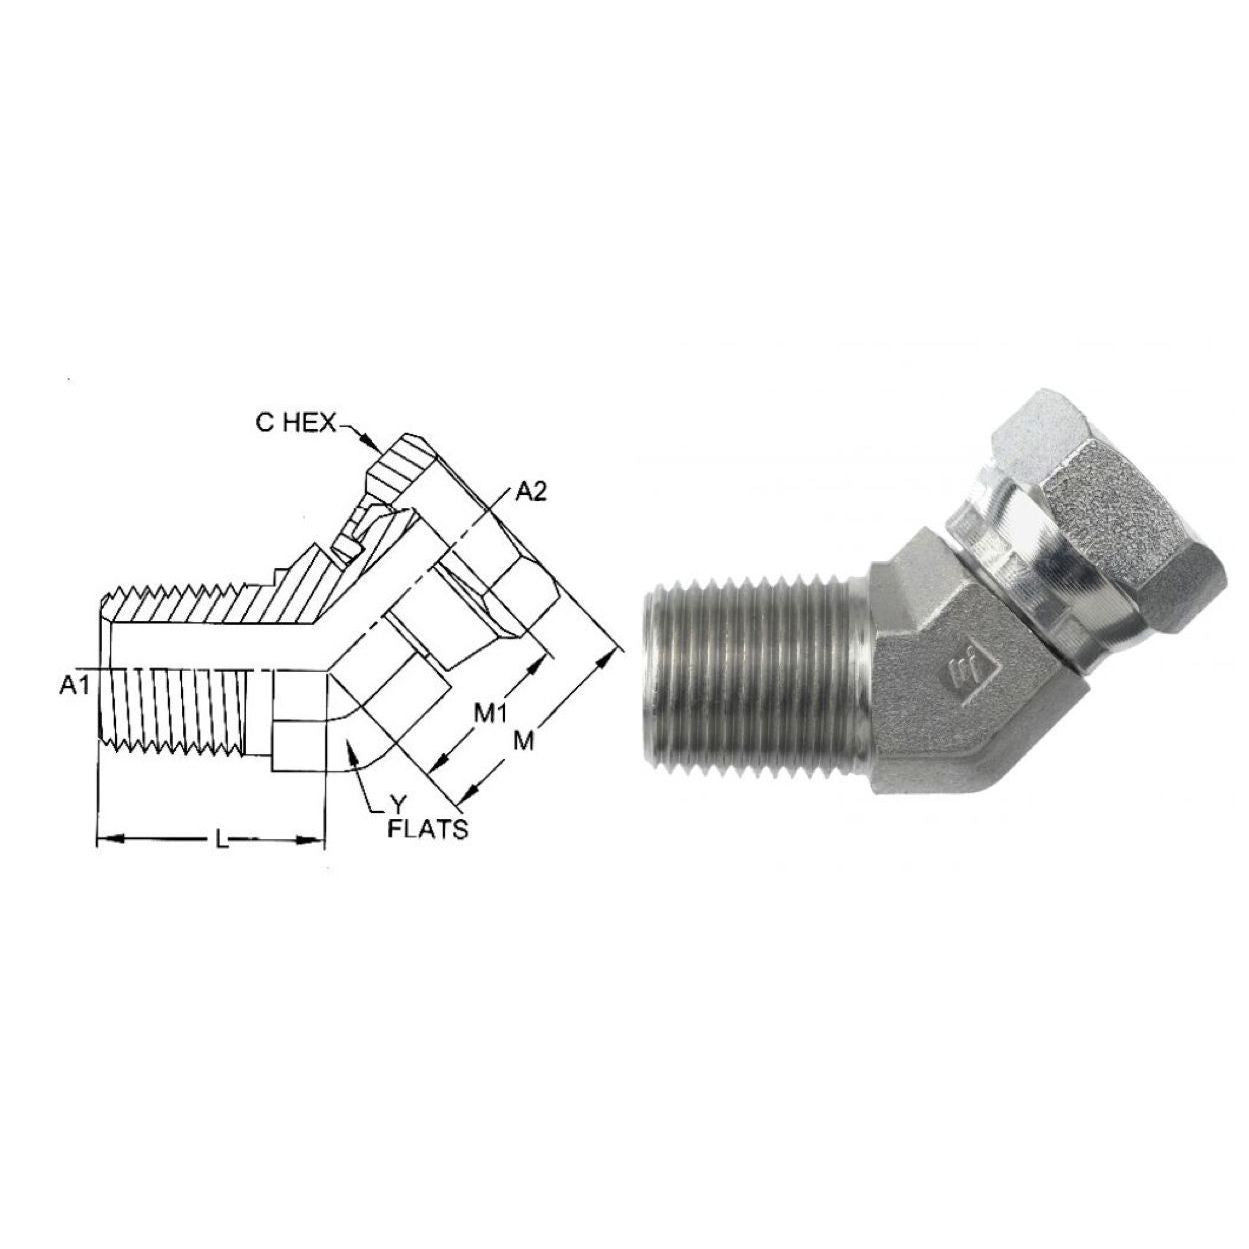 1503-02-02-SS : OneHydraulics 45-Degree Elbow, 0.125 (1/8) Male NPT x 0.125 (1/8) Female NPT Swivel, Stainless Steel, 6000psi